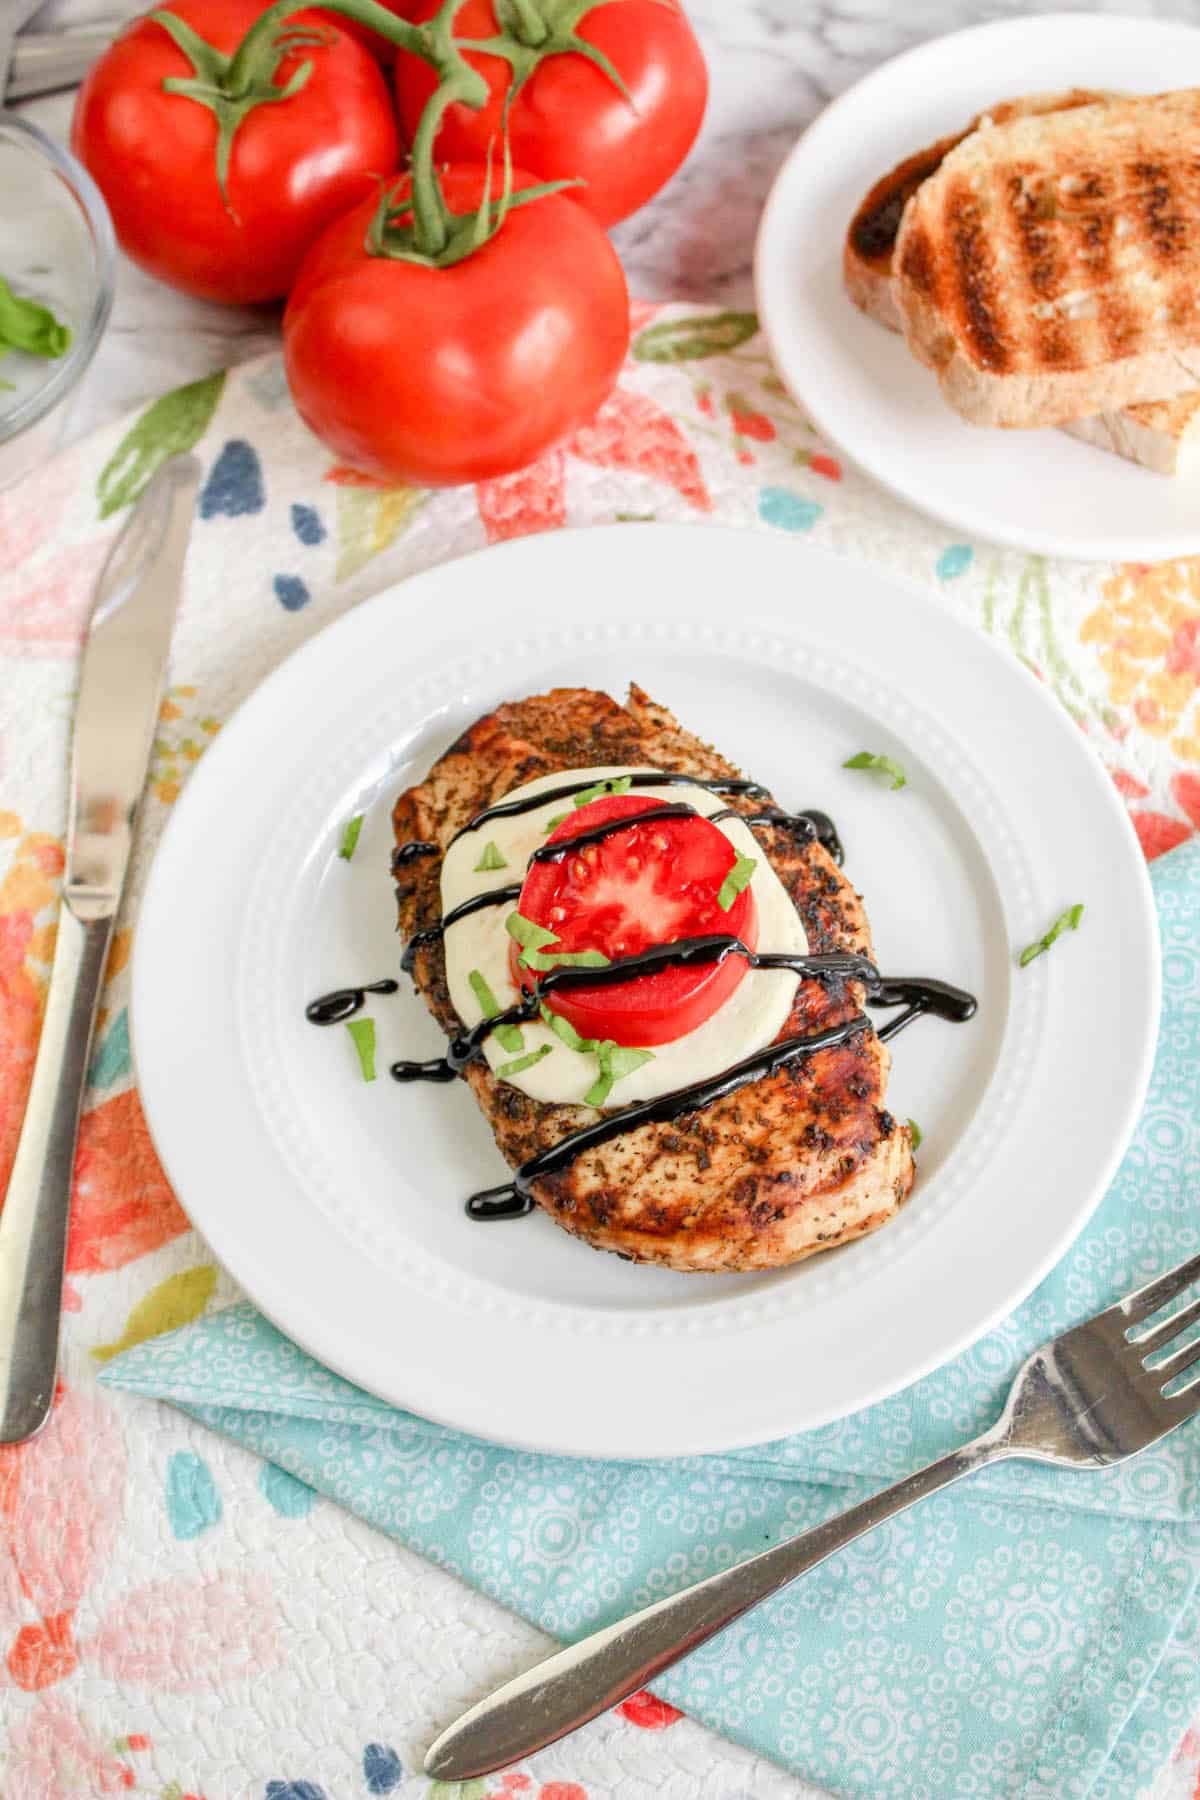 Grilled chicken with tomato and mozzarella, basil, and balsamic glaze on top, on white plate with tomatoes and grilled bread.